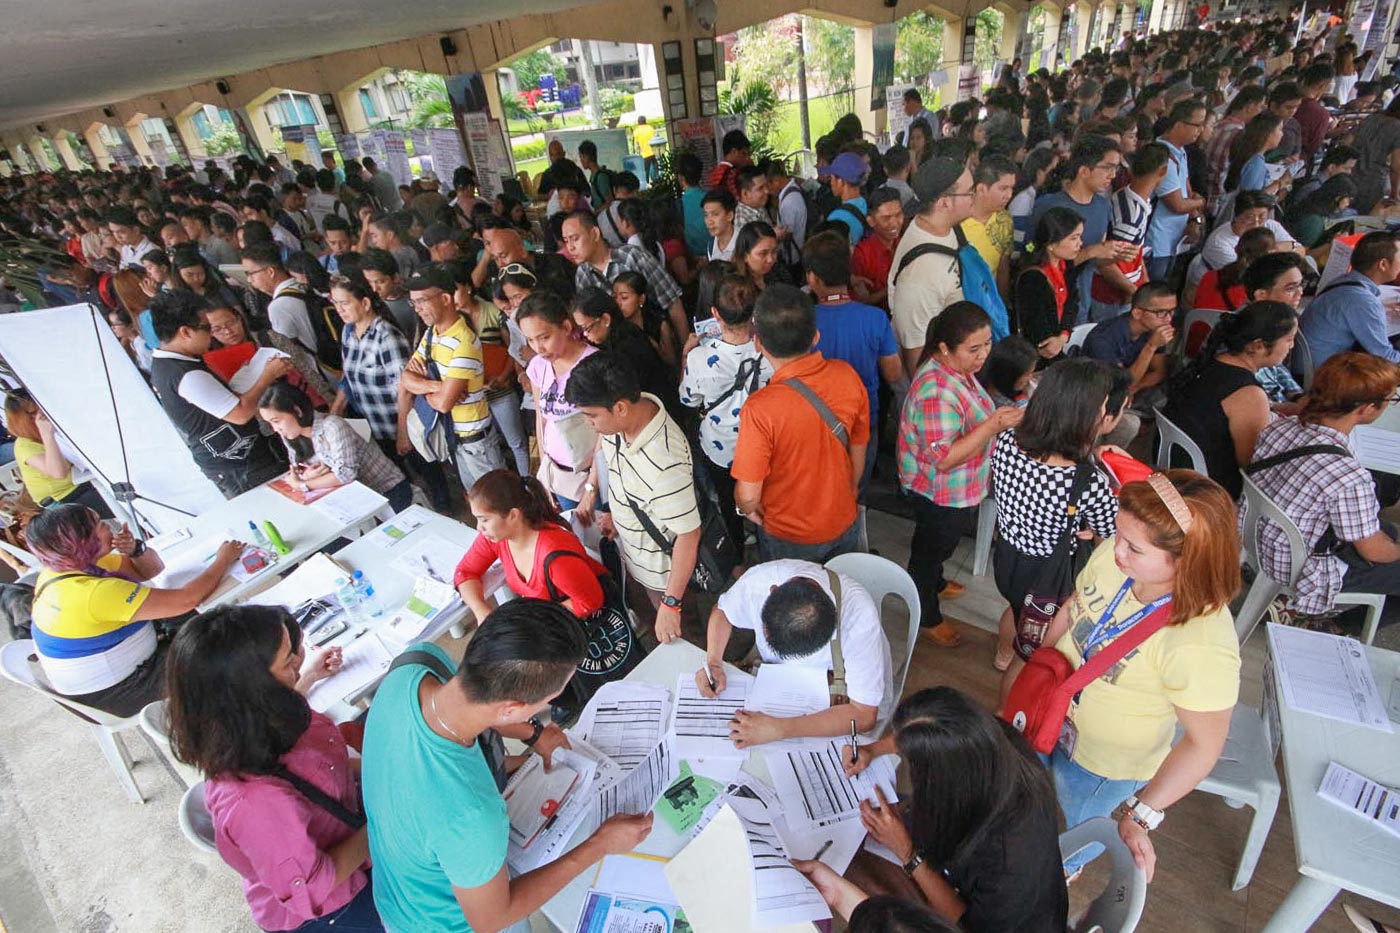 'OPTIMISTIC'. Job seekers check opportunities at a job fair in Quezon City. The December 2017 SWS survey says 49% of Filipinos expect to have better lives in 2018. File photo by Darren Langit/Rappler 